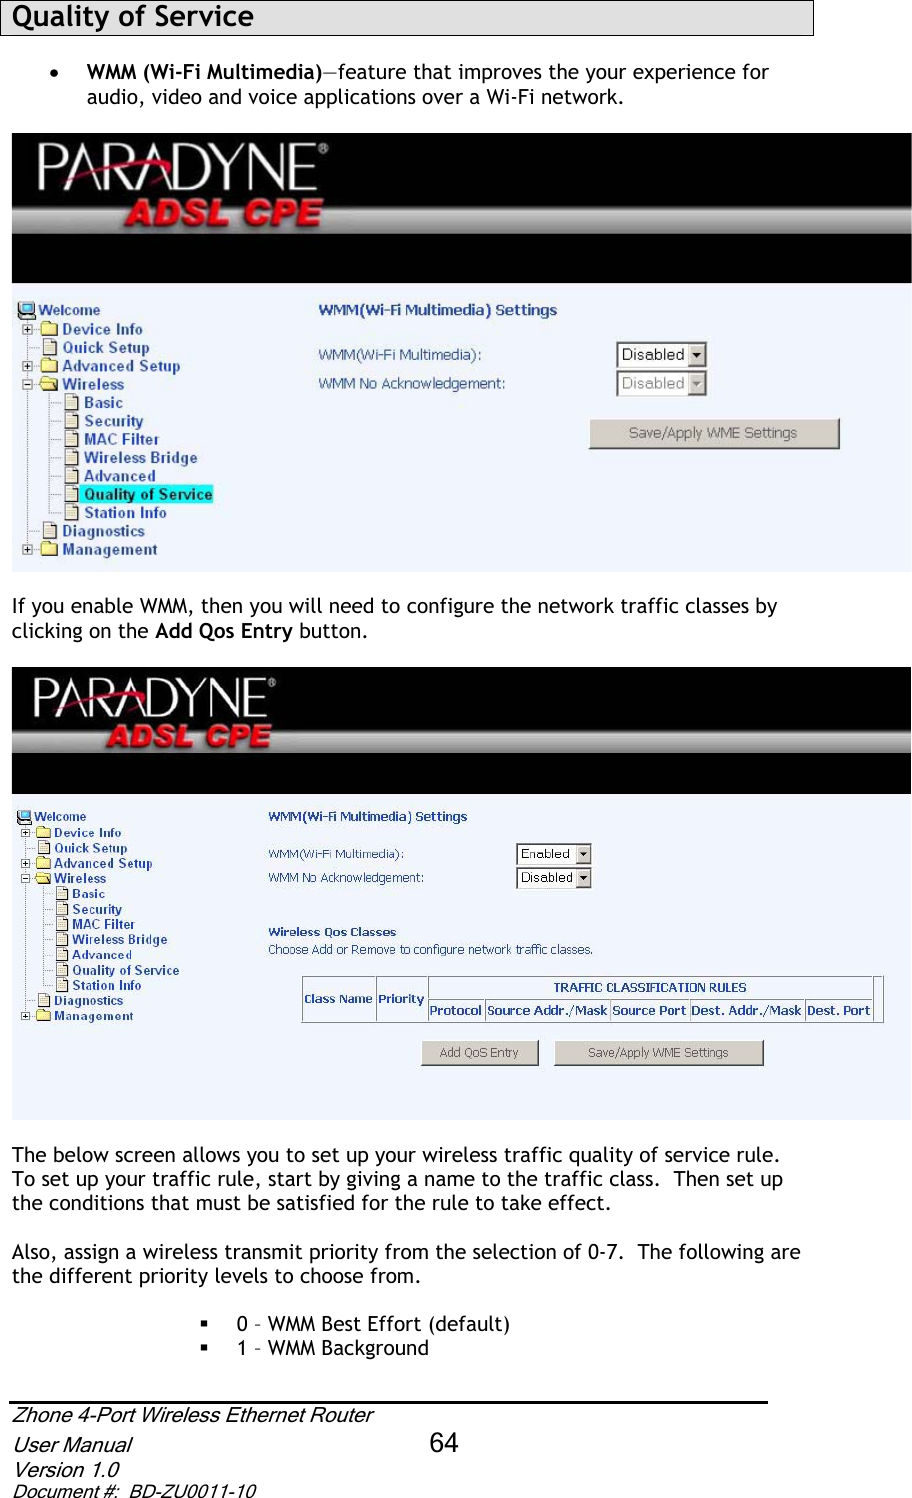 Quality of Service x WMM (Wi-Fi Multimedia)—feature that improves the your experience for audio, video and voice applications over a Wi-Fi network. If you enable WMM, then you will need to configure the network traffic classes by clicking on the Add Qos Entry button.The below screen allows you to set up your wireless traffic quality of service rule.  To set up your traffic rule, start by giving a name to the traffic class.  Then set up the conditions that must be satisfied for the rule to take effect.   Also, assign a wireless transmit priority from the selection of 0-7.  The following are the different priority levels to choose from.  0 – WMM Best Effort (default)  1 – WMM Background Zhone 4-Port Wireless Ethernet Router User Manual 64Version 1.0 Document #:  BD-ZU0011-10